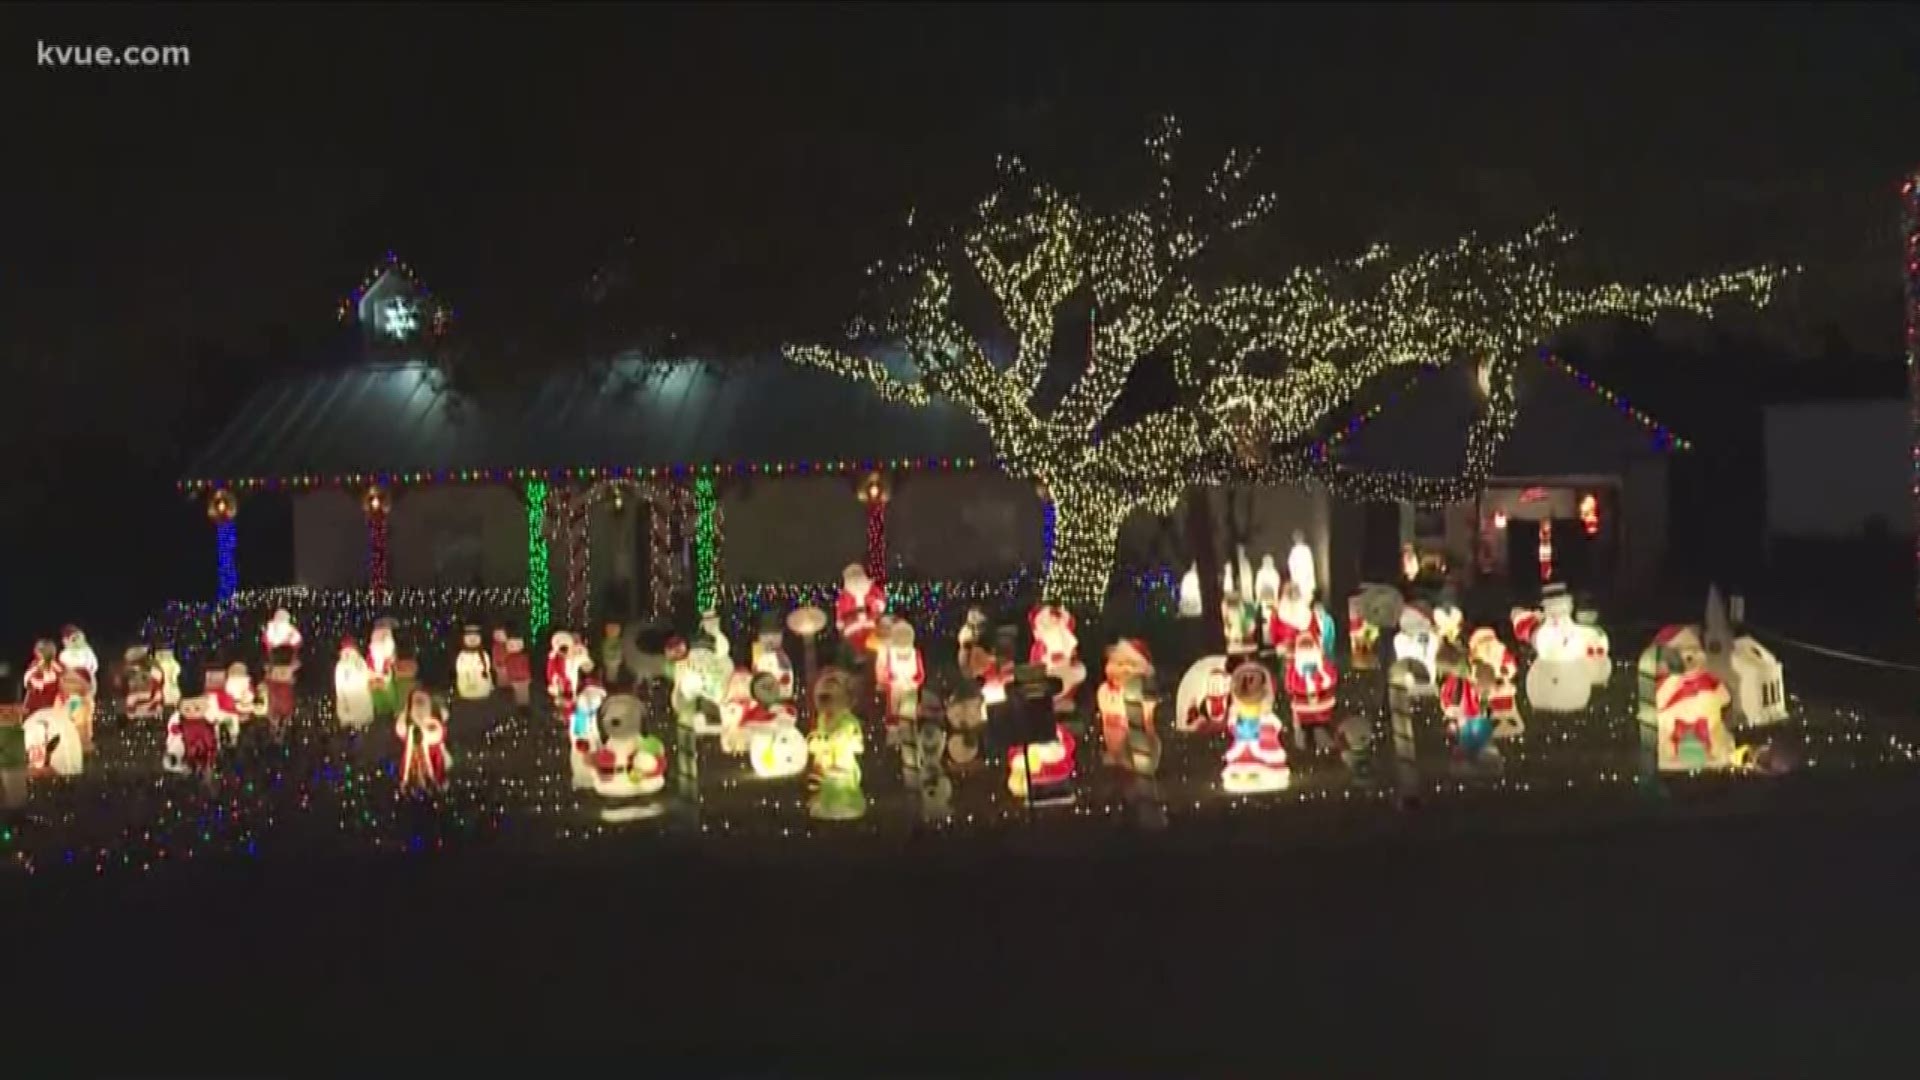 A family in southwest Austin won $50,000 after taking home the grand prize on ABC's "The Great Christmas Light Fight."